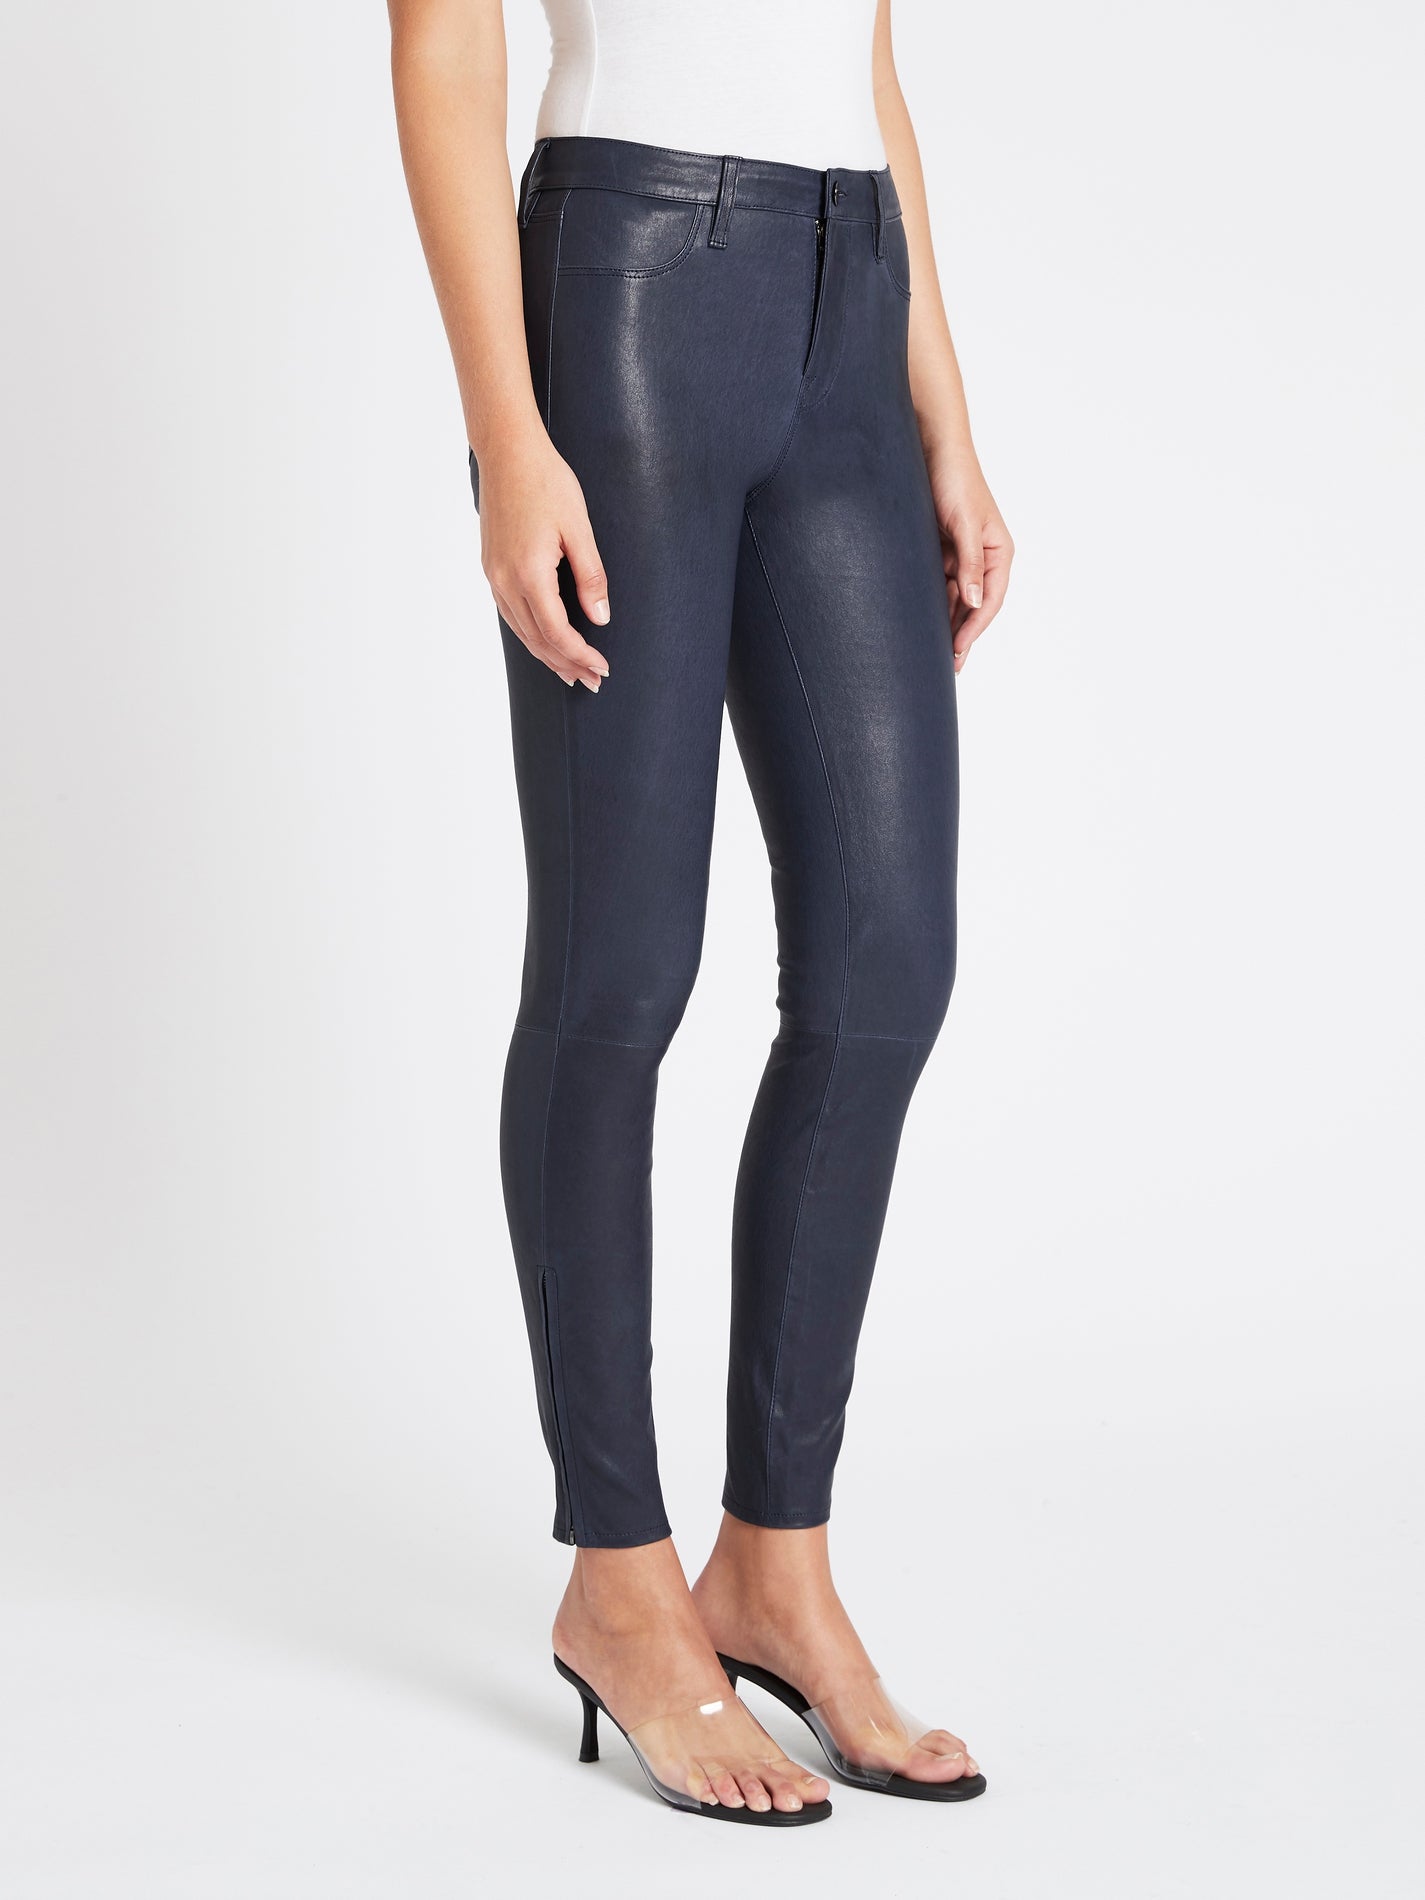 J Brand Mid Rise Skinny Leather Pant in Dark Fitzroy – Order Of Style